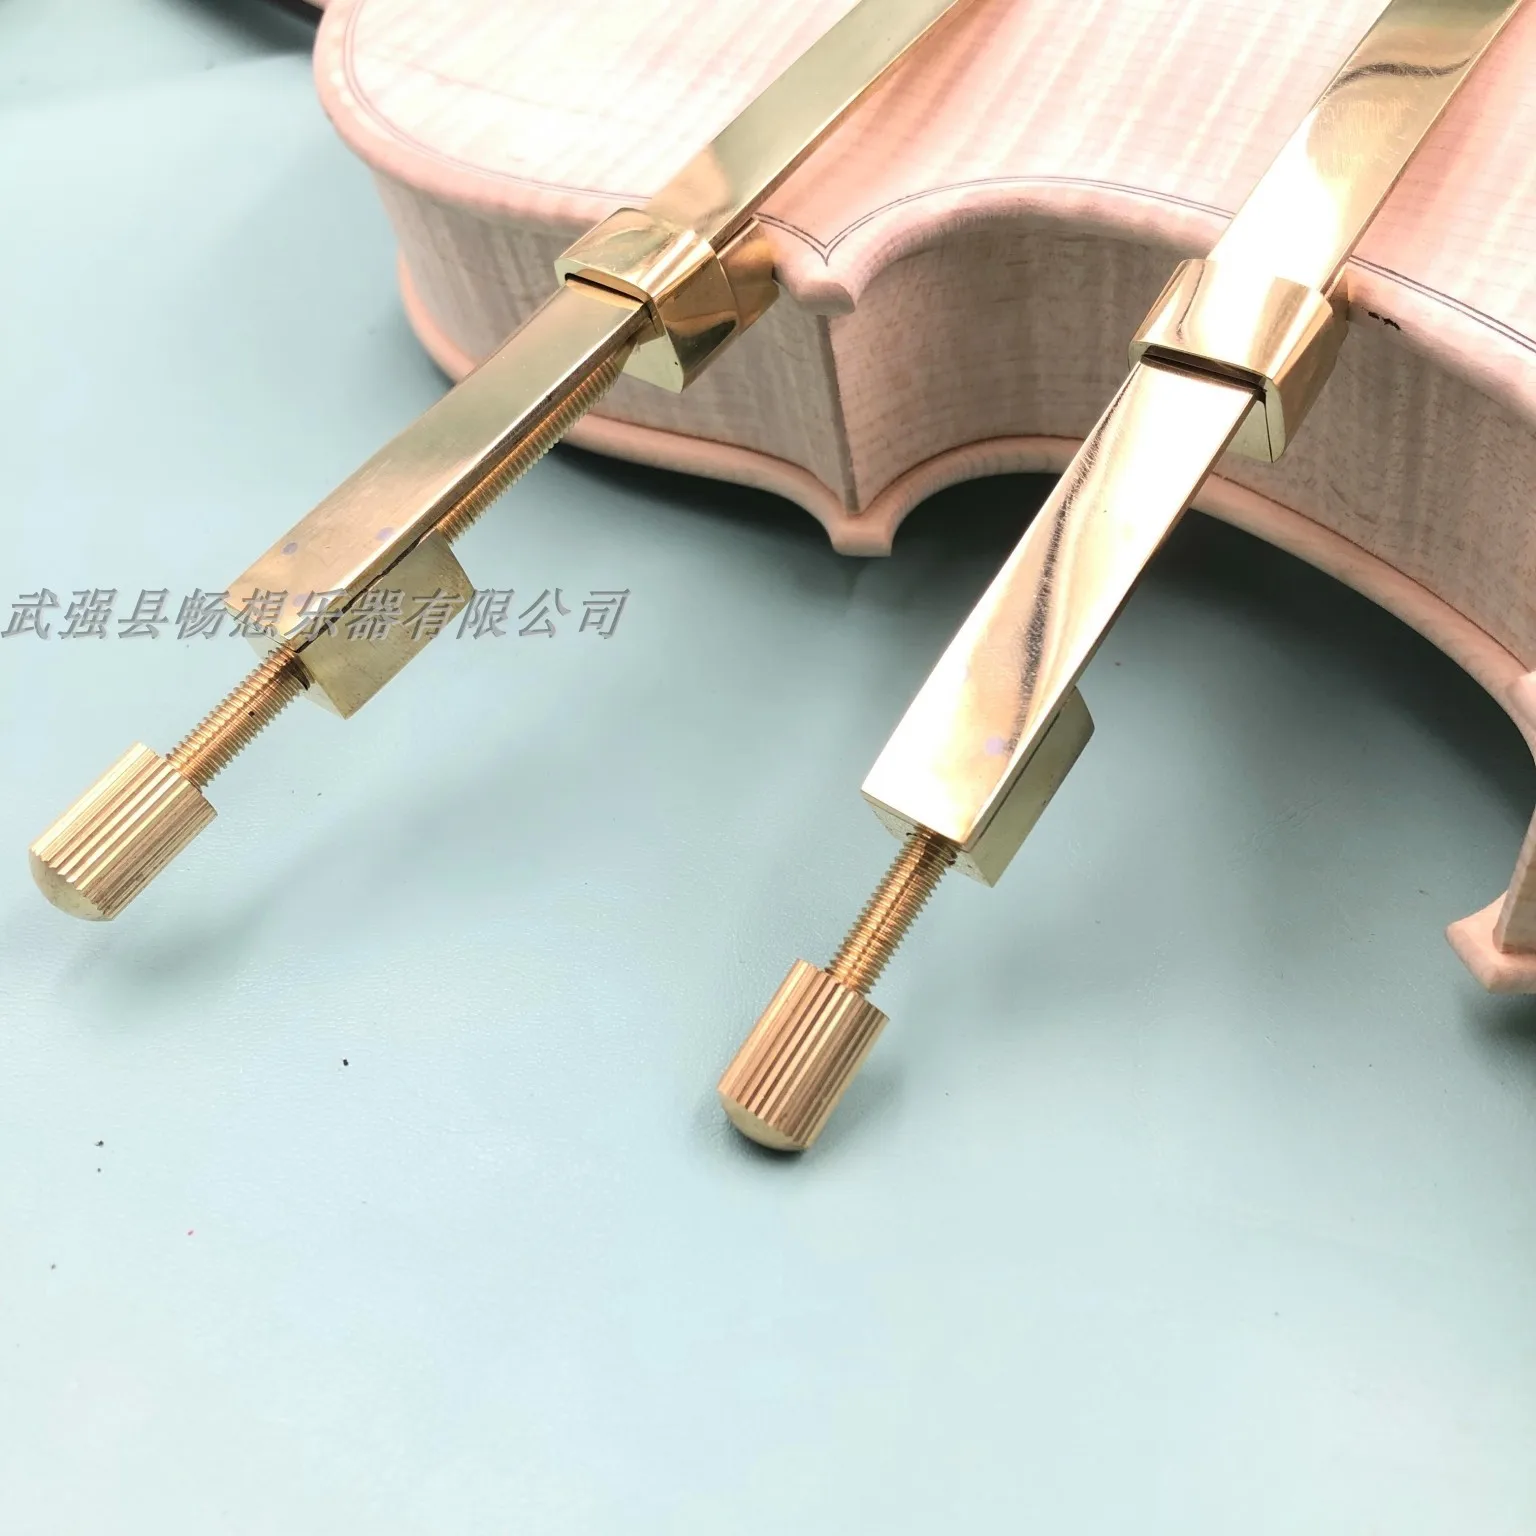 5pcs High quality Violin Tool,brass repair crack plate-type clamp,Luthier tool enlarge